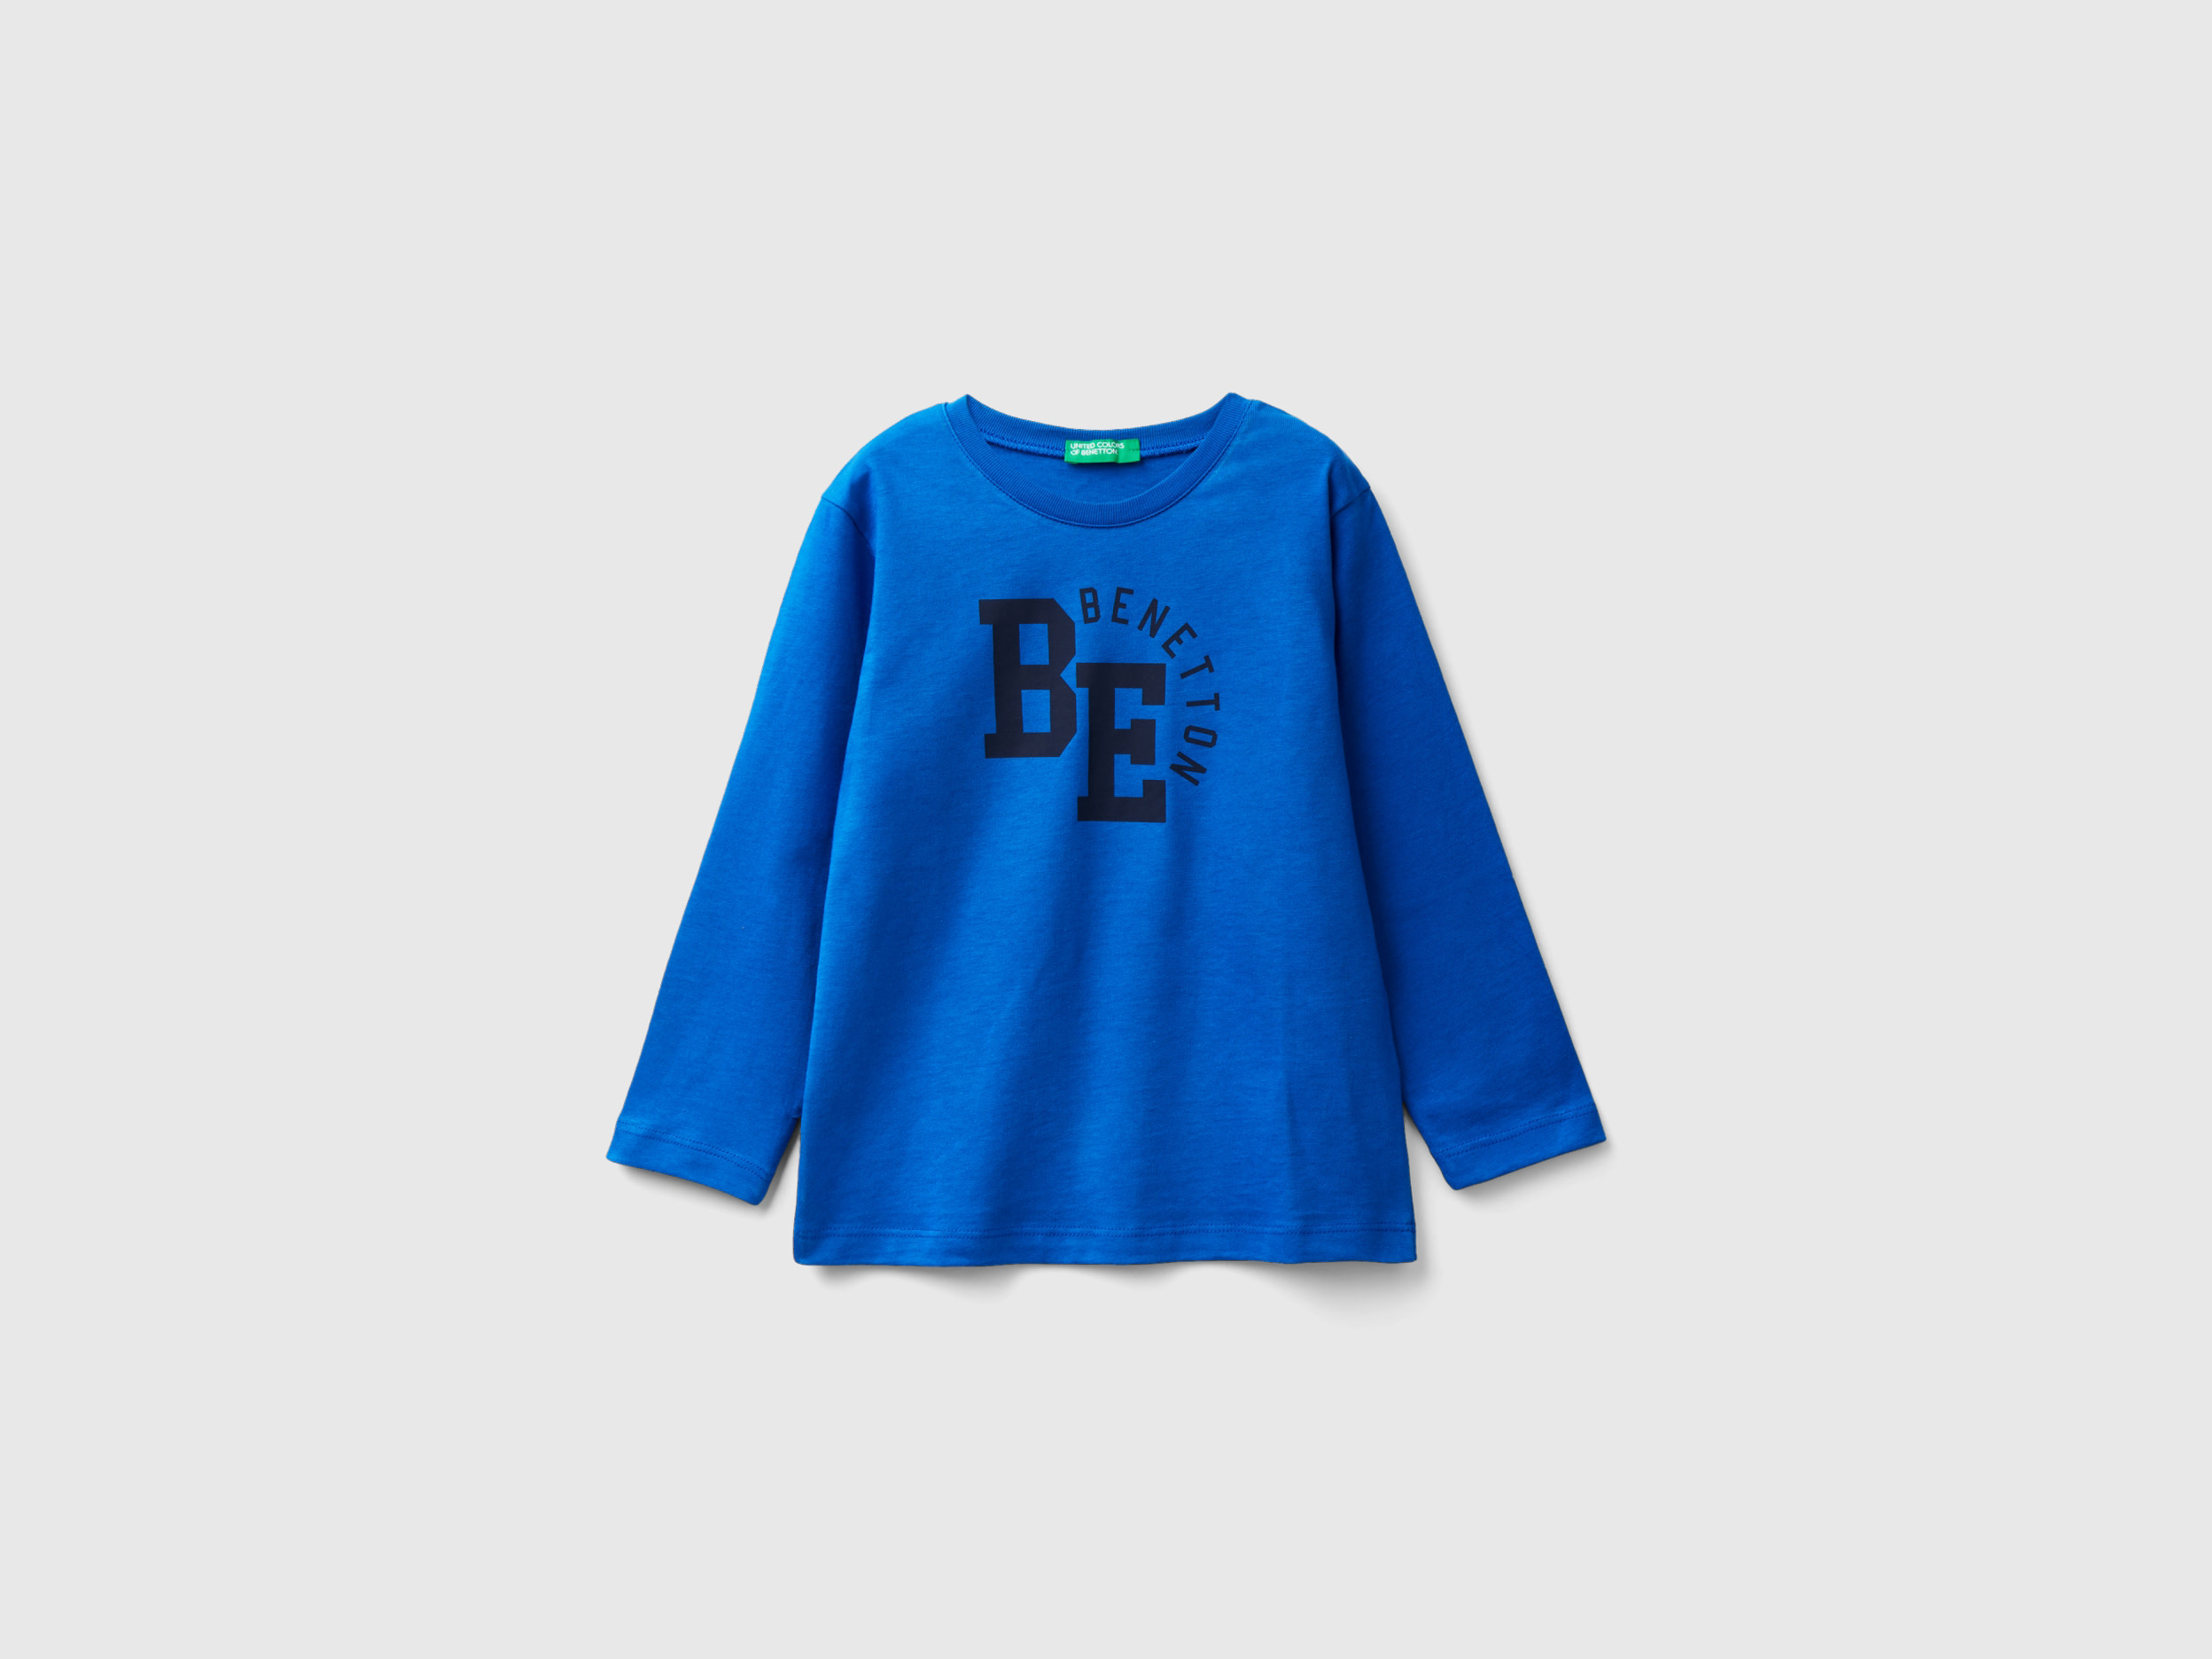 Benetton, Long Sleeve T-shirt With Logo, size 12-18, Bright Blue, Kids